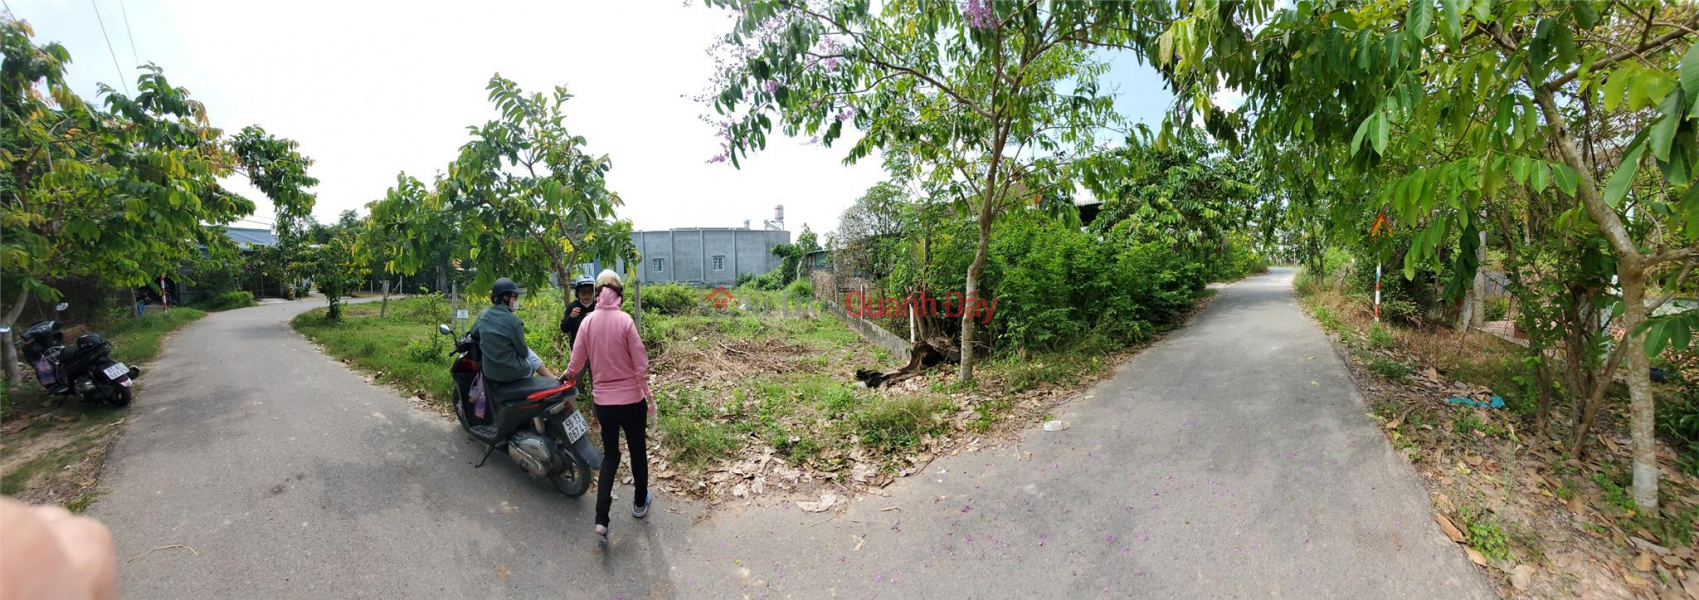 BEAUTIFUL LOCATION - GOOD PRICE - Land Lot For Quick Sale In Cu Chi, near Tay Bac Industrial Park, Vietnam Sales, ₫ 1.8 Billion